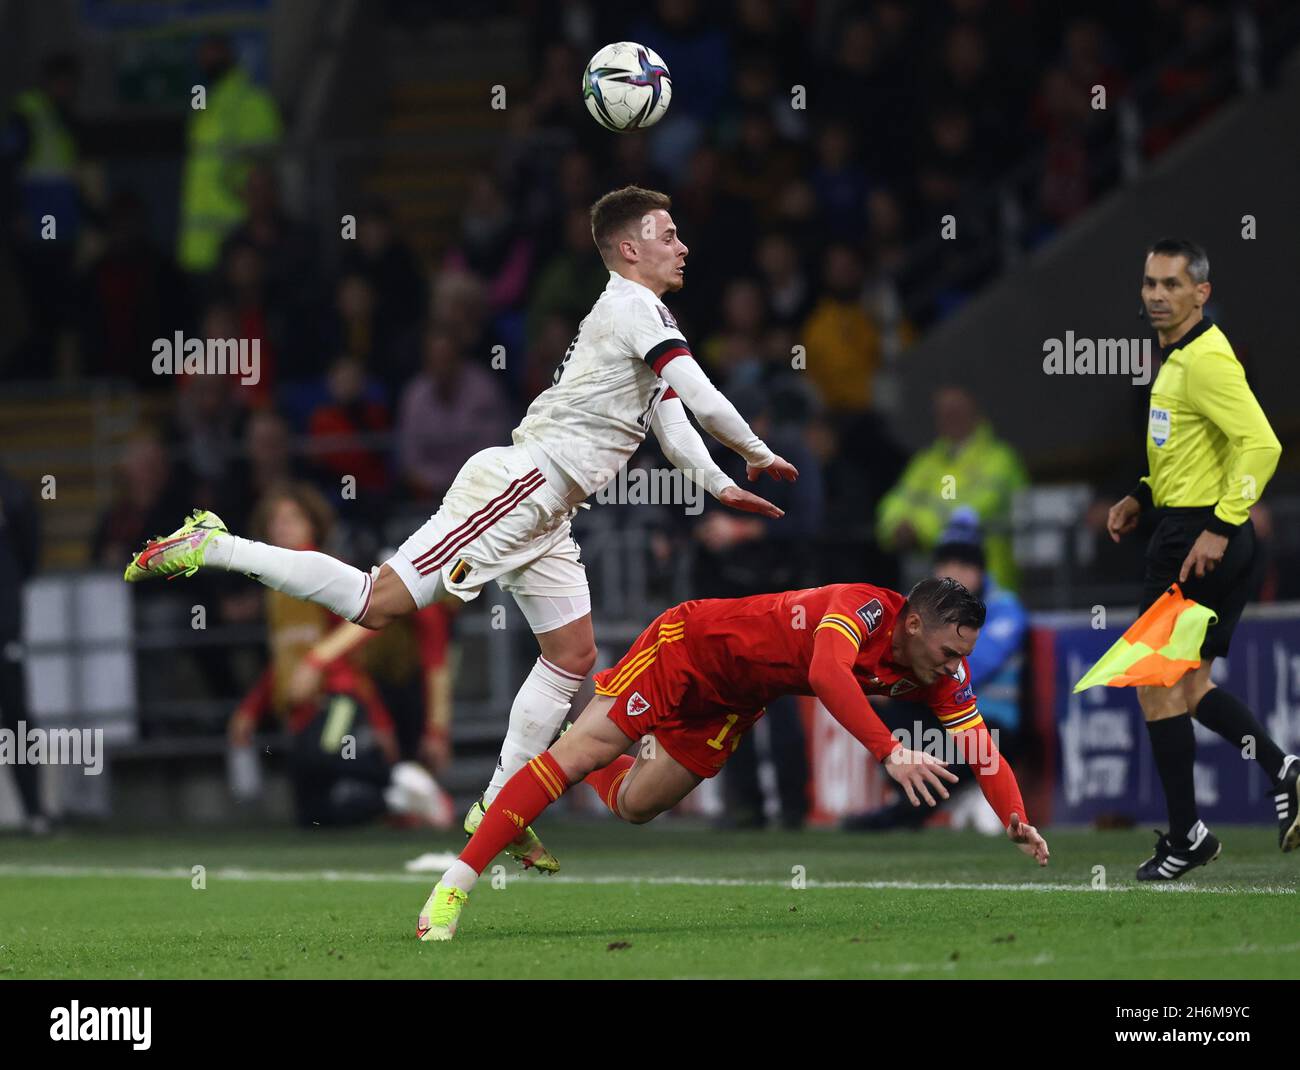 Cardiff, Wales, 16th November 2021. Connor Roberts of Wales challenged by Thomas Meunier of Belgium  during the FIFA World Cup 2022 European Qualifying match at the Cardiff City Stadium, Cardiff. Picture credit should read: Darren Staples / Sportimage Stock Photo